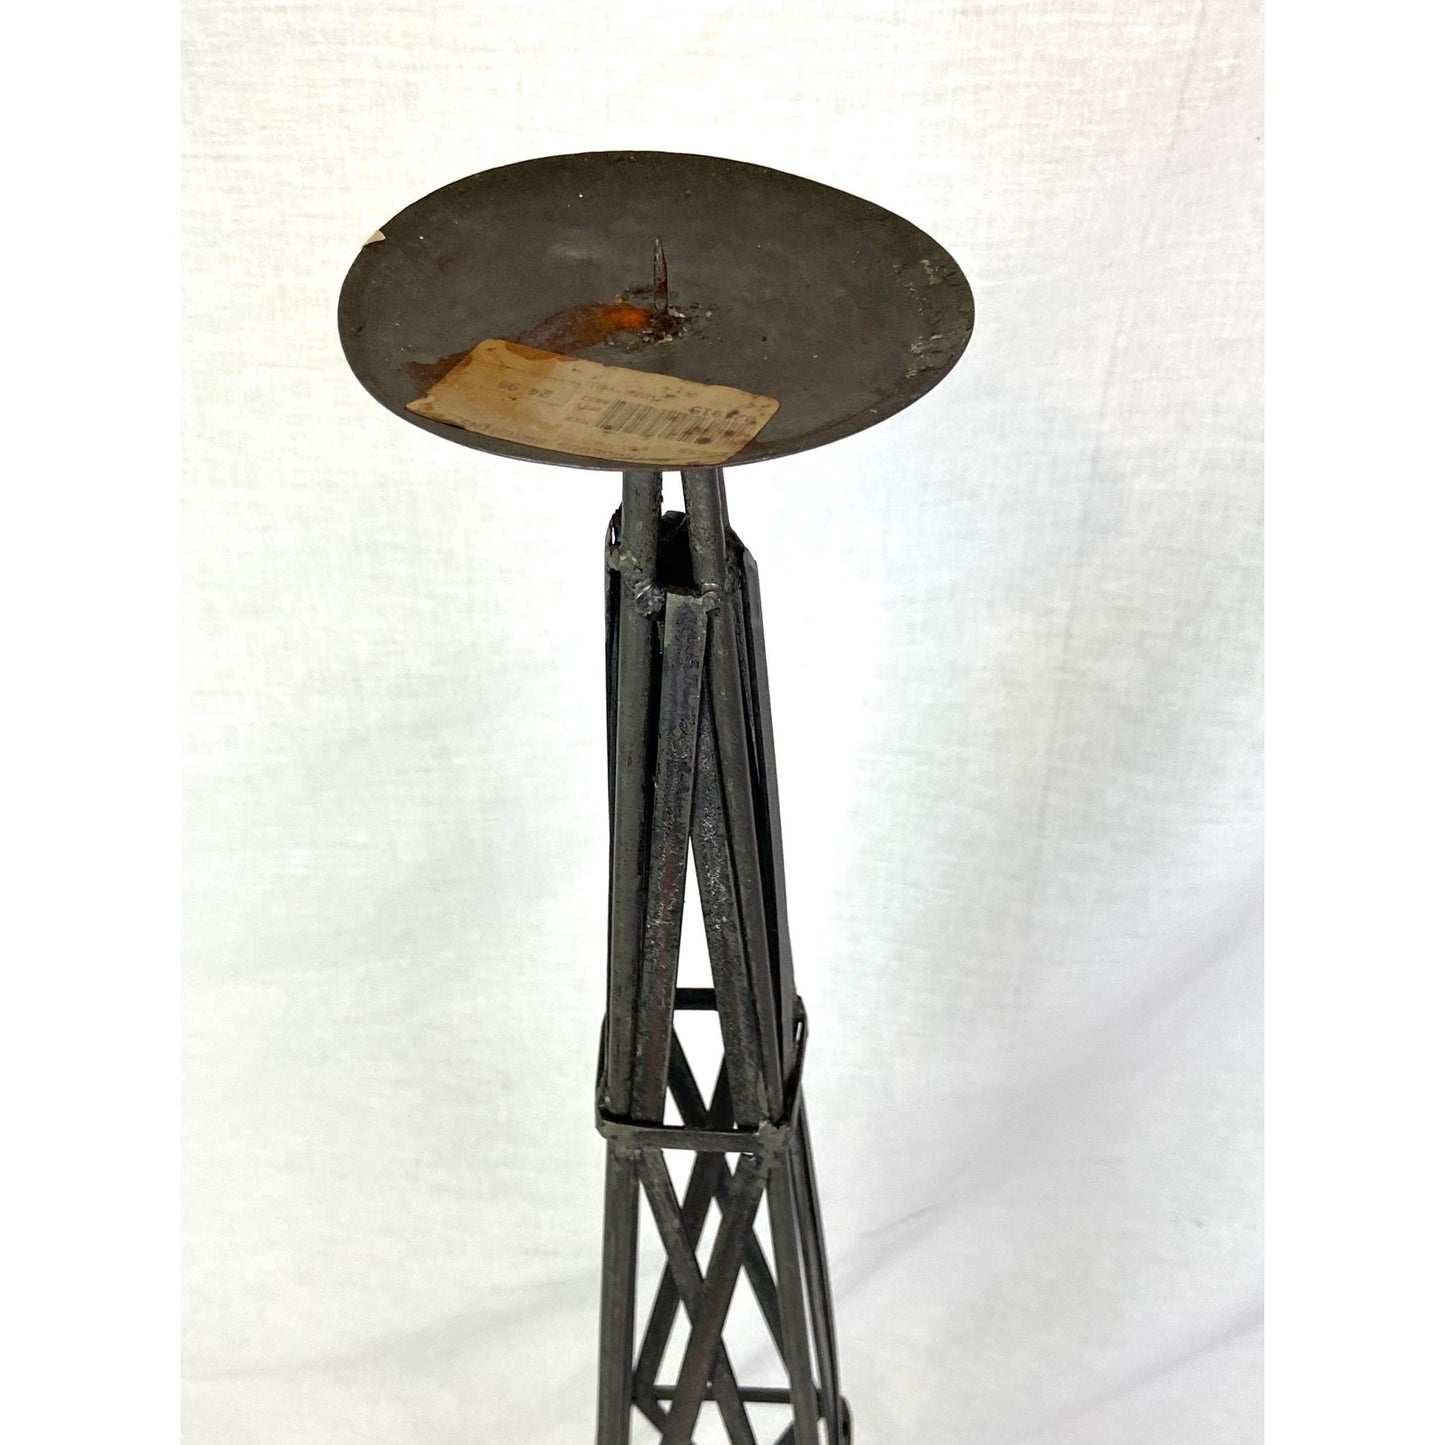 [SOLD] Industrial Modern Iron Tower Sculpture Candle Holder